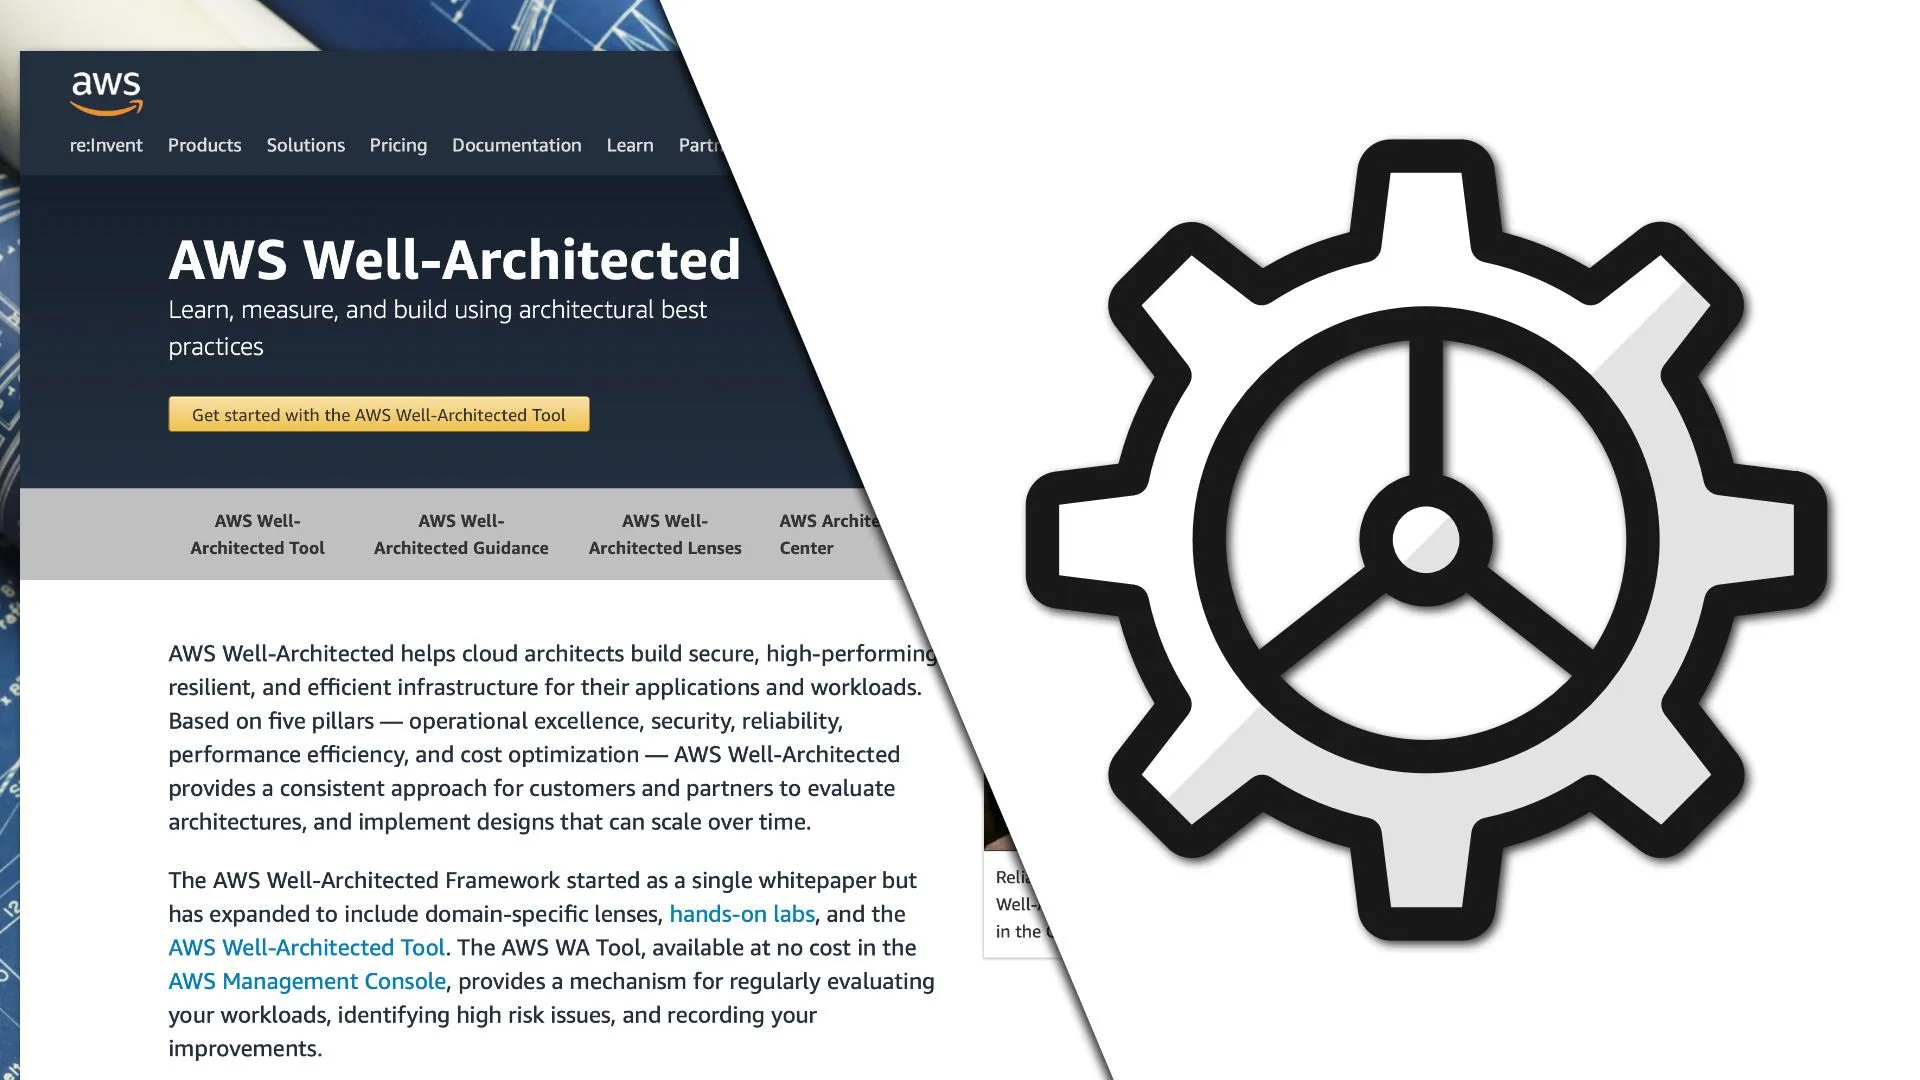 Operational Excellence in the AWS Well-Architected Framework